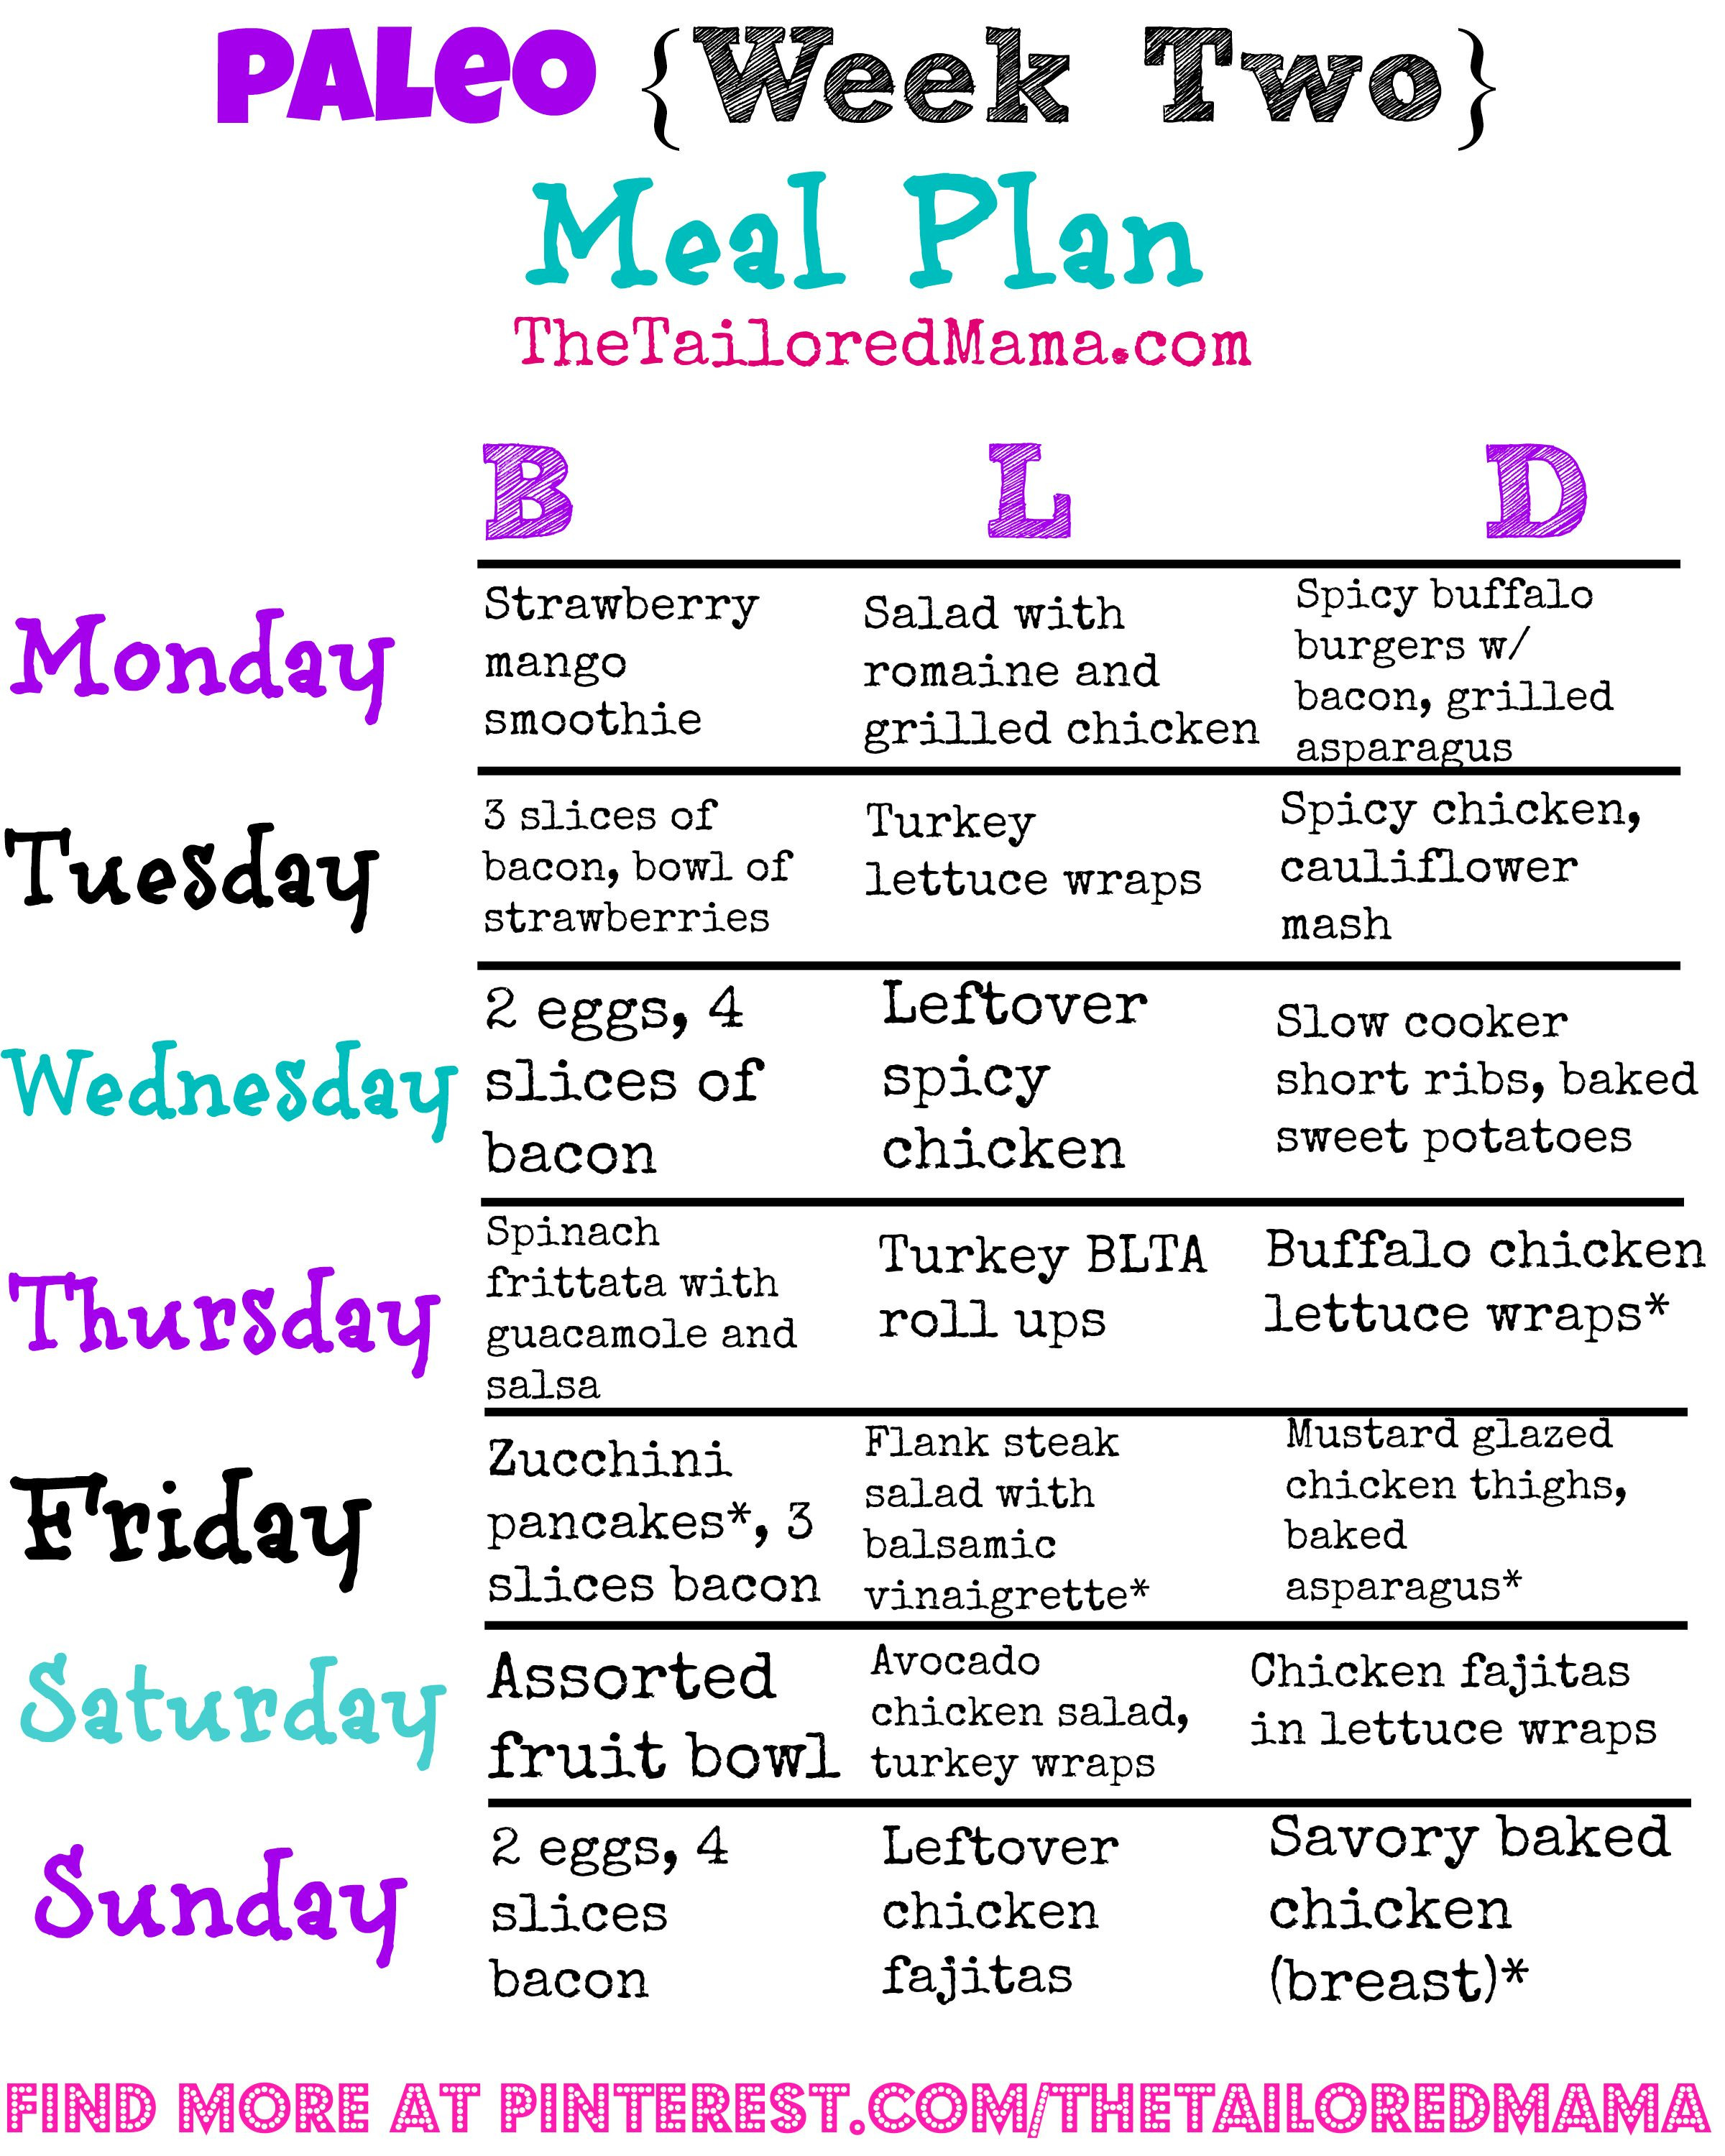 Paleo Diet Meal Plans
 Paleo Week Two Meal Plan perfect for NY resolutions to